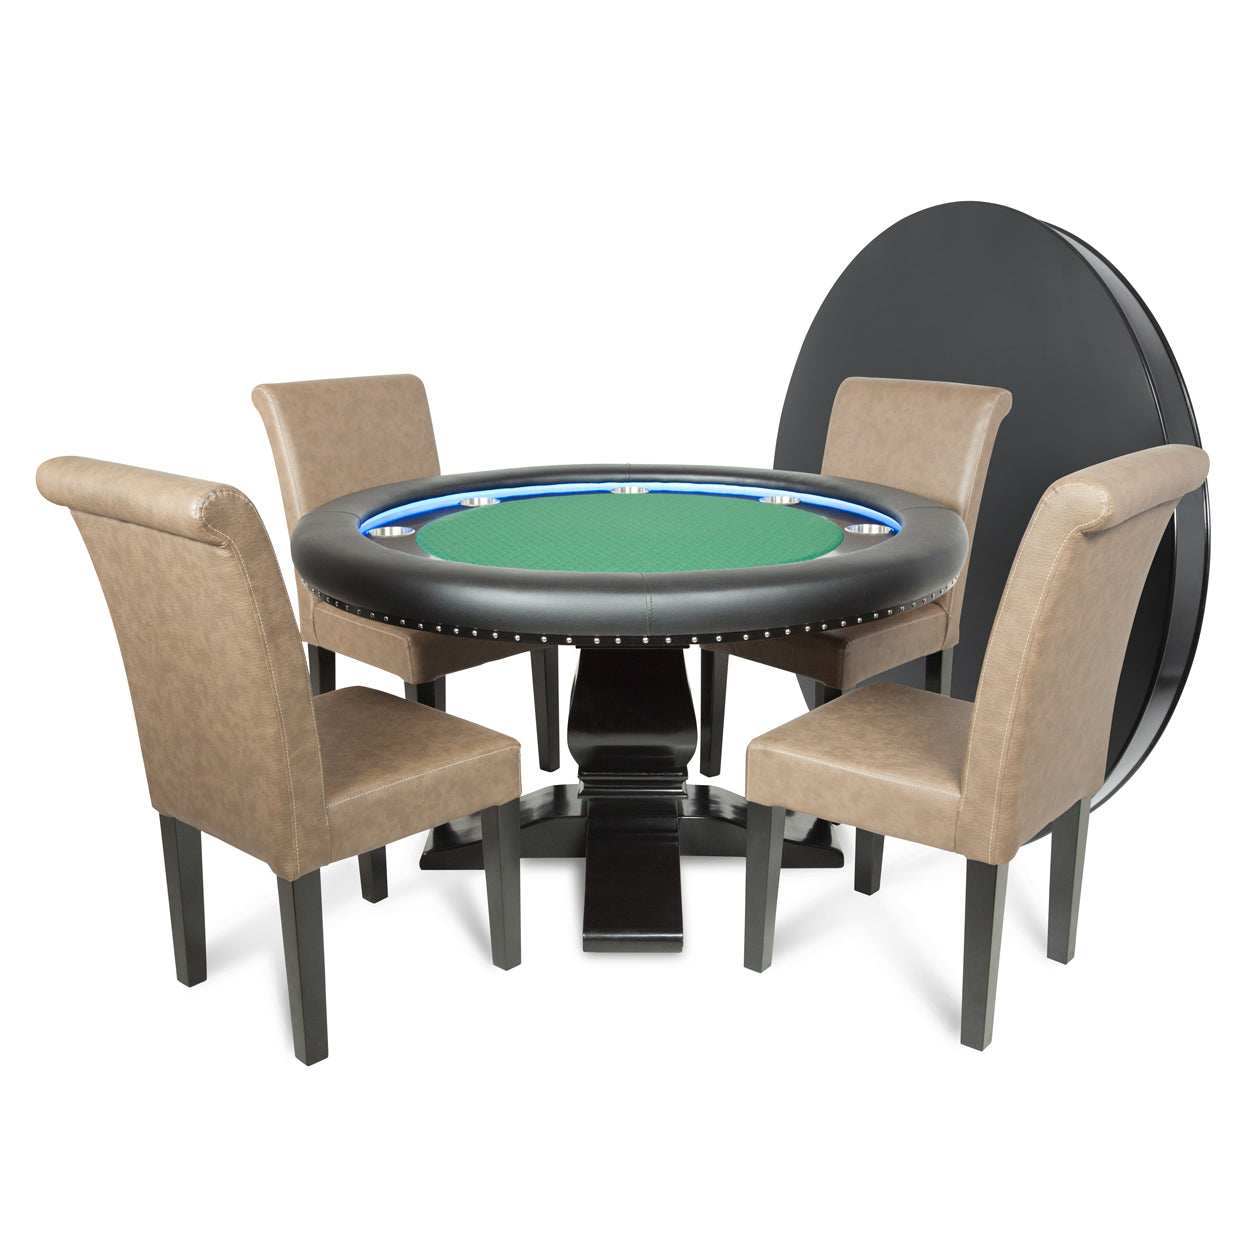 BBO The Ginza LED Poker Table Green Speed Cloth Dining set